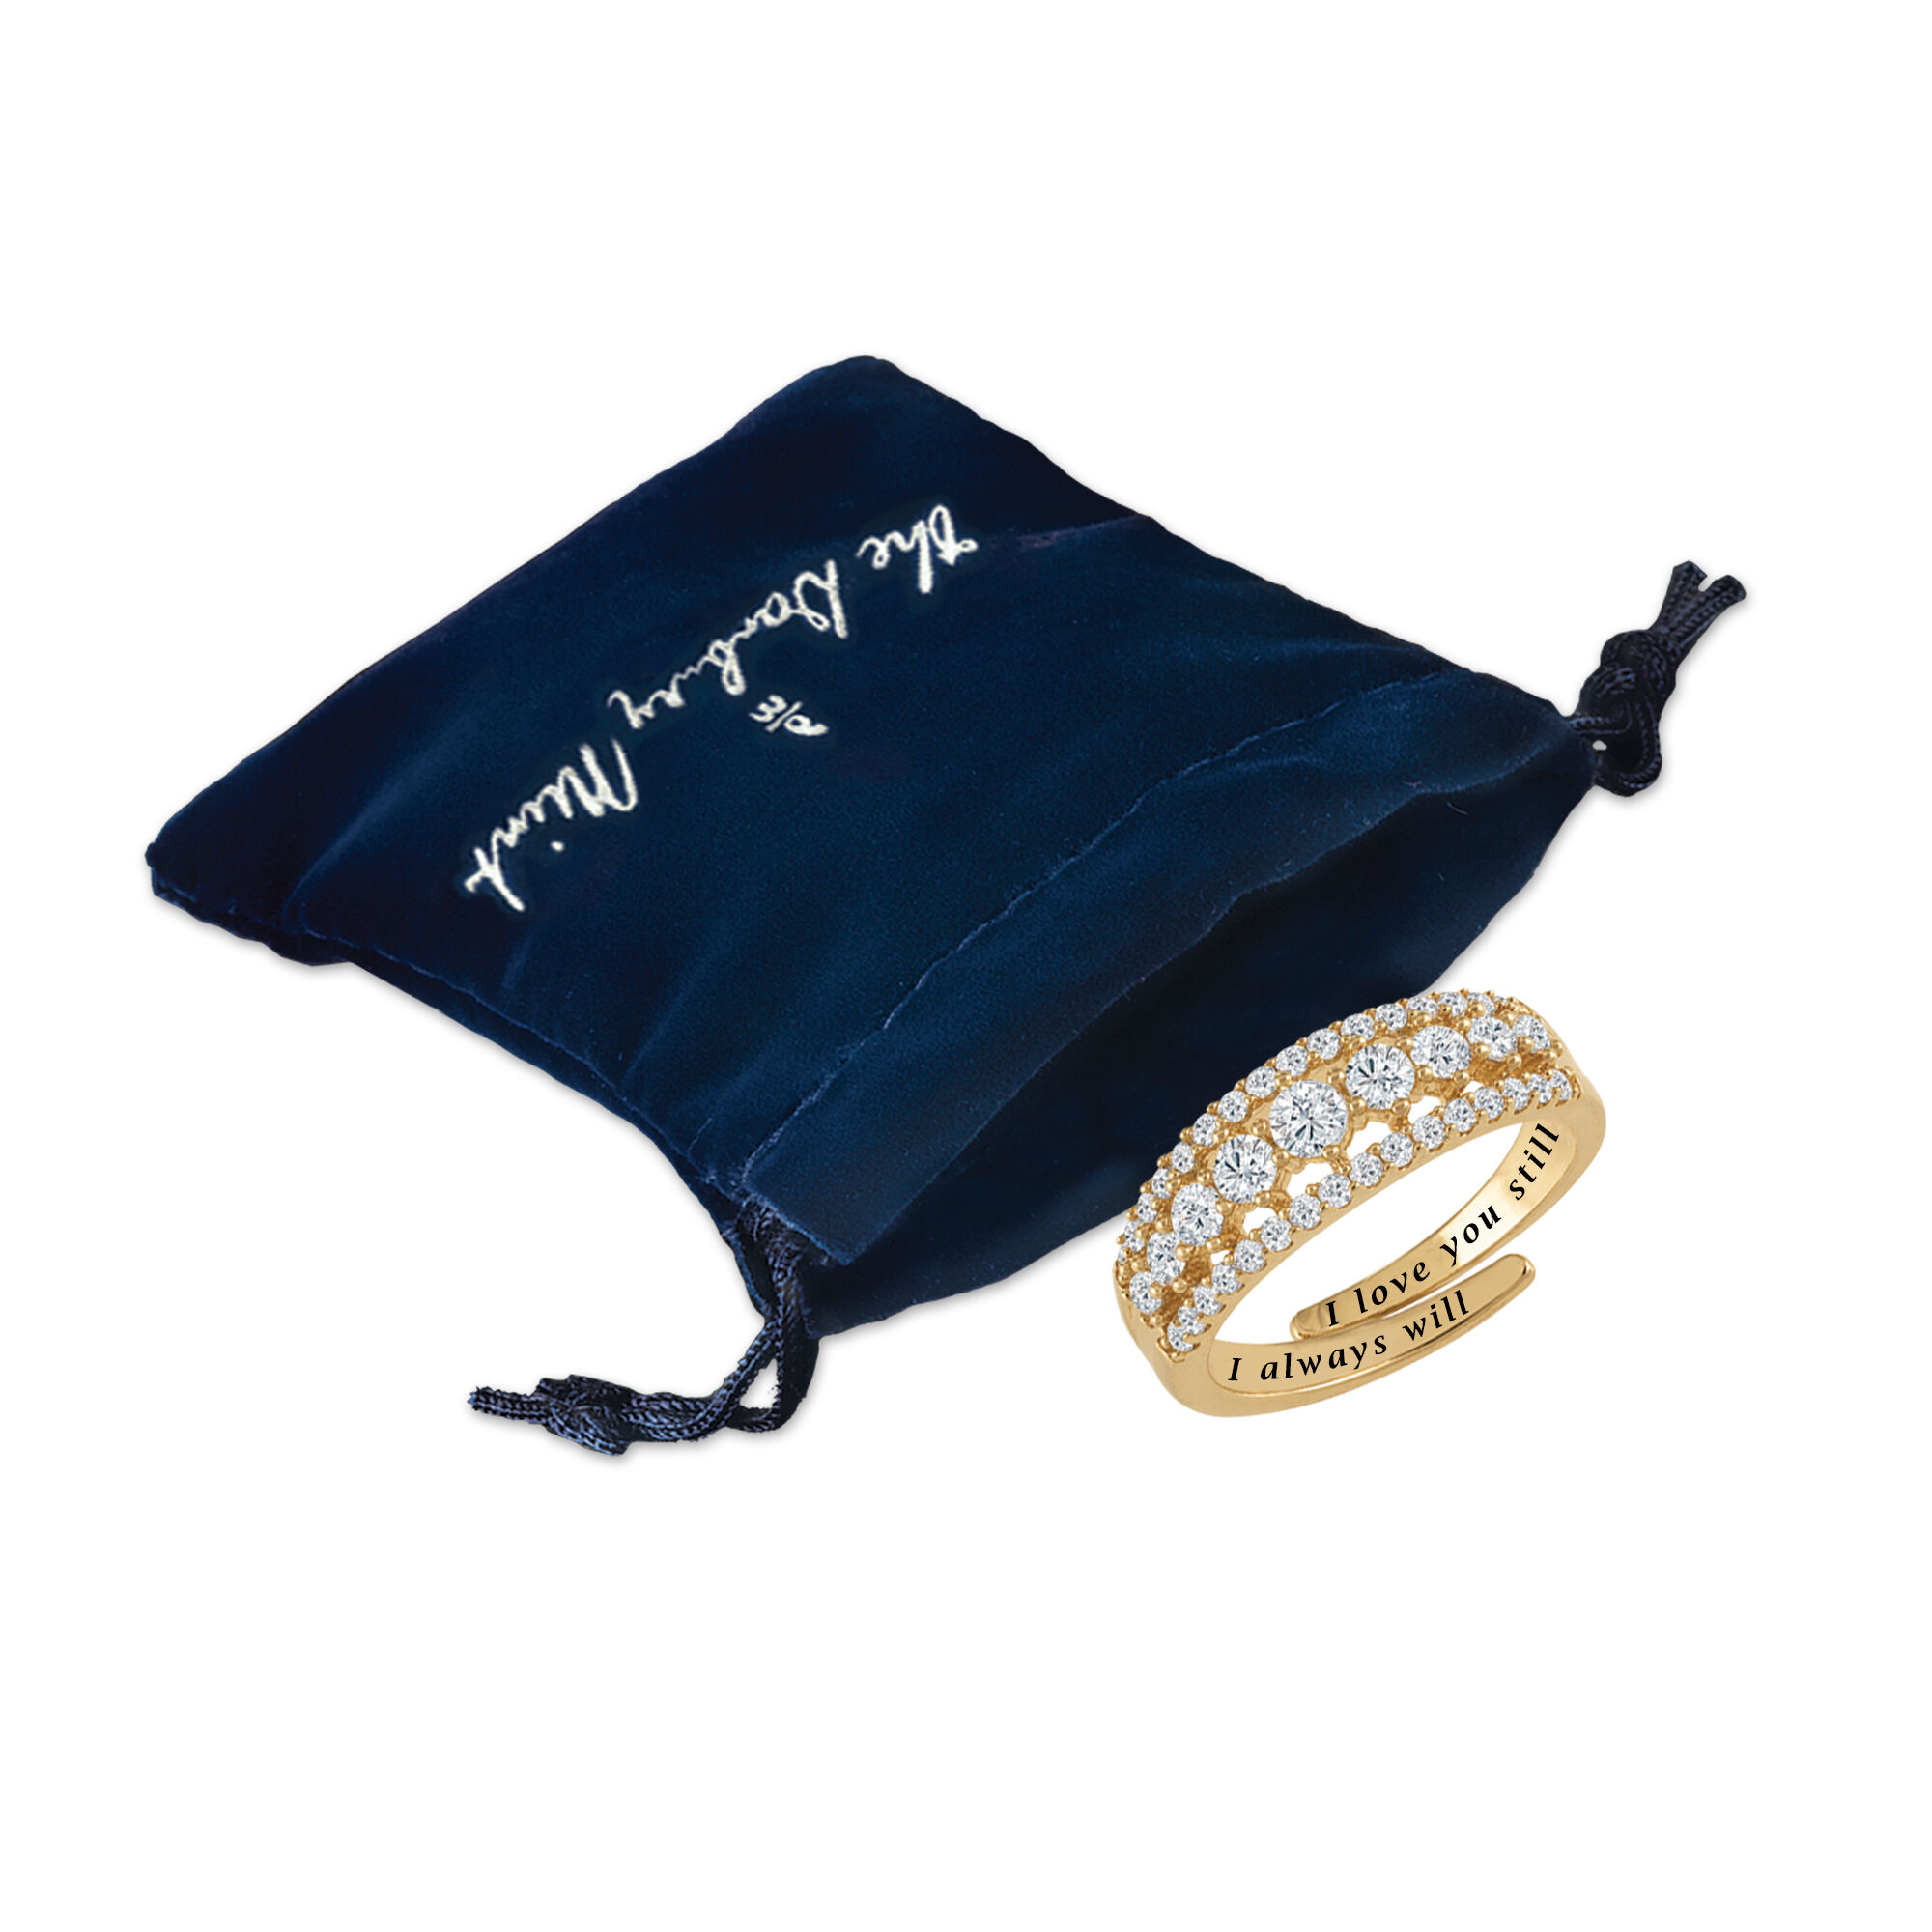 Our Love is Forever Diamonisse Adjustable Ring 6987 0012 g gift pouch